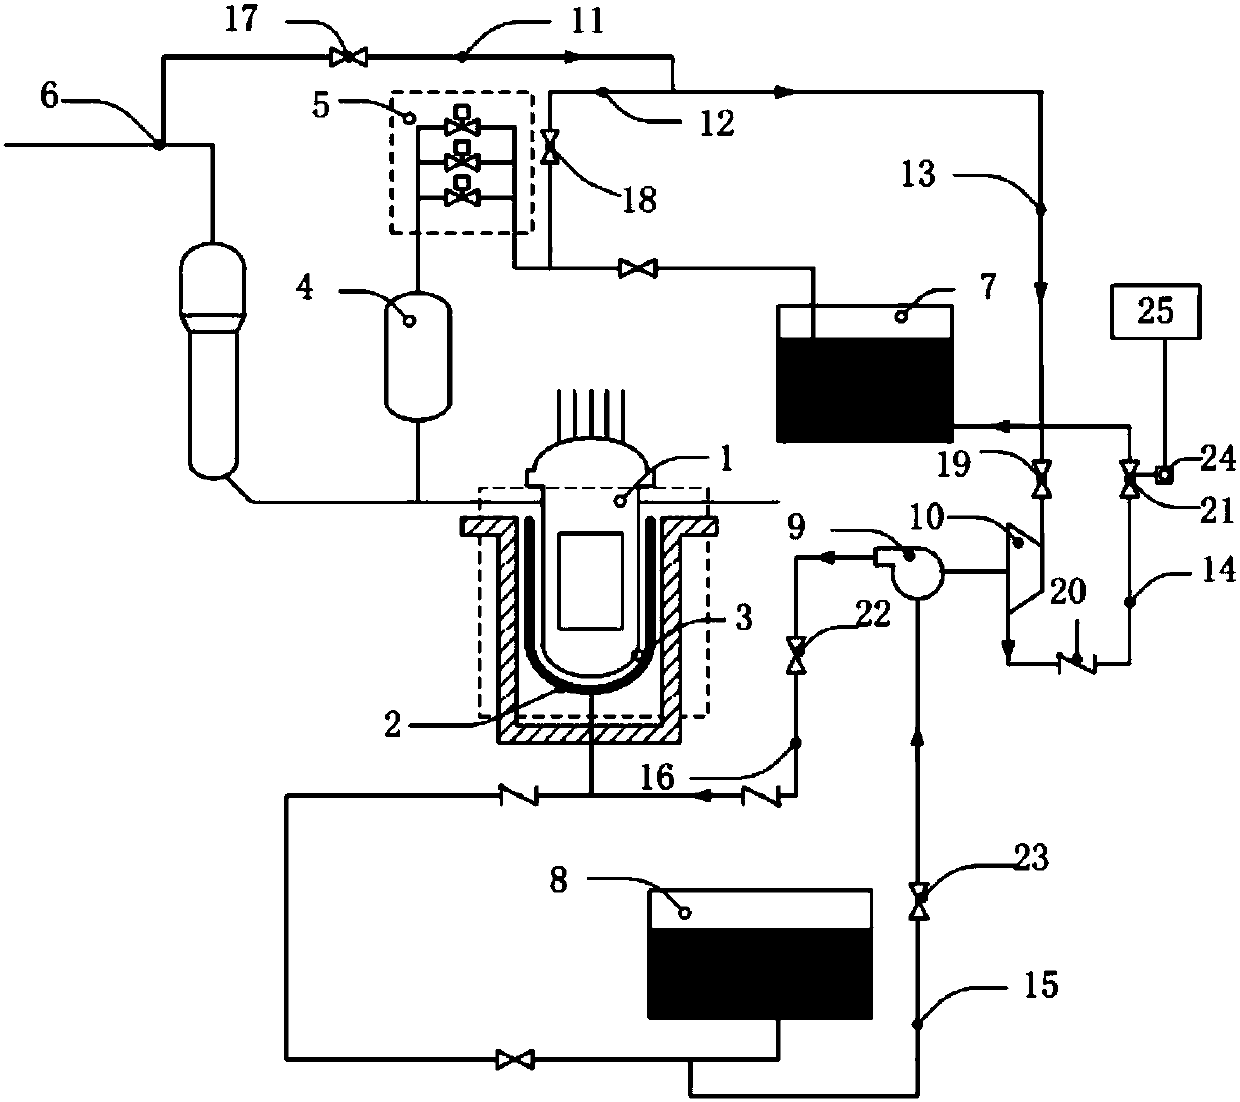 Auxiliary cooling system for reaction core of passive reactor